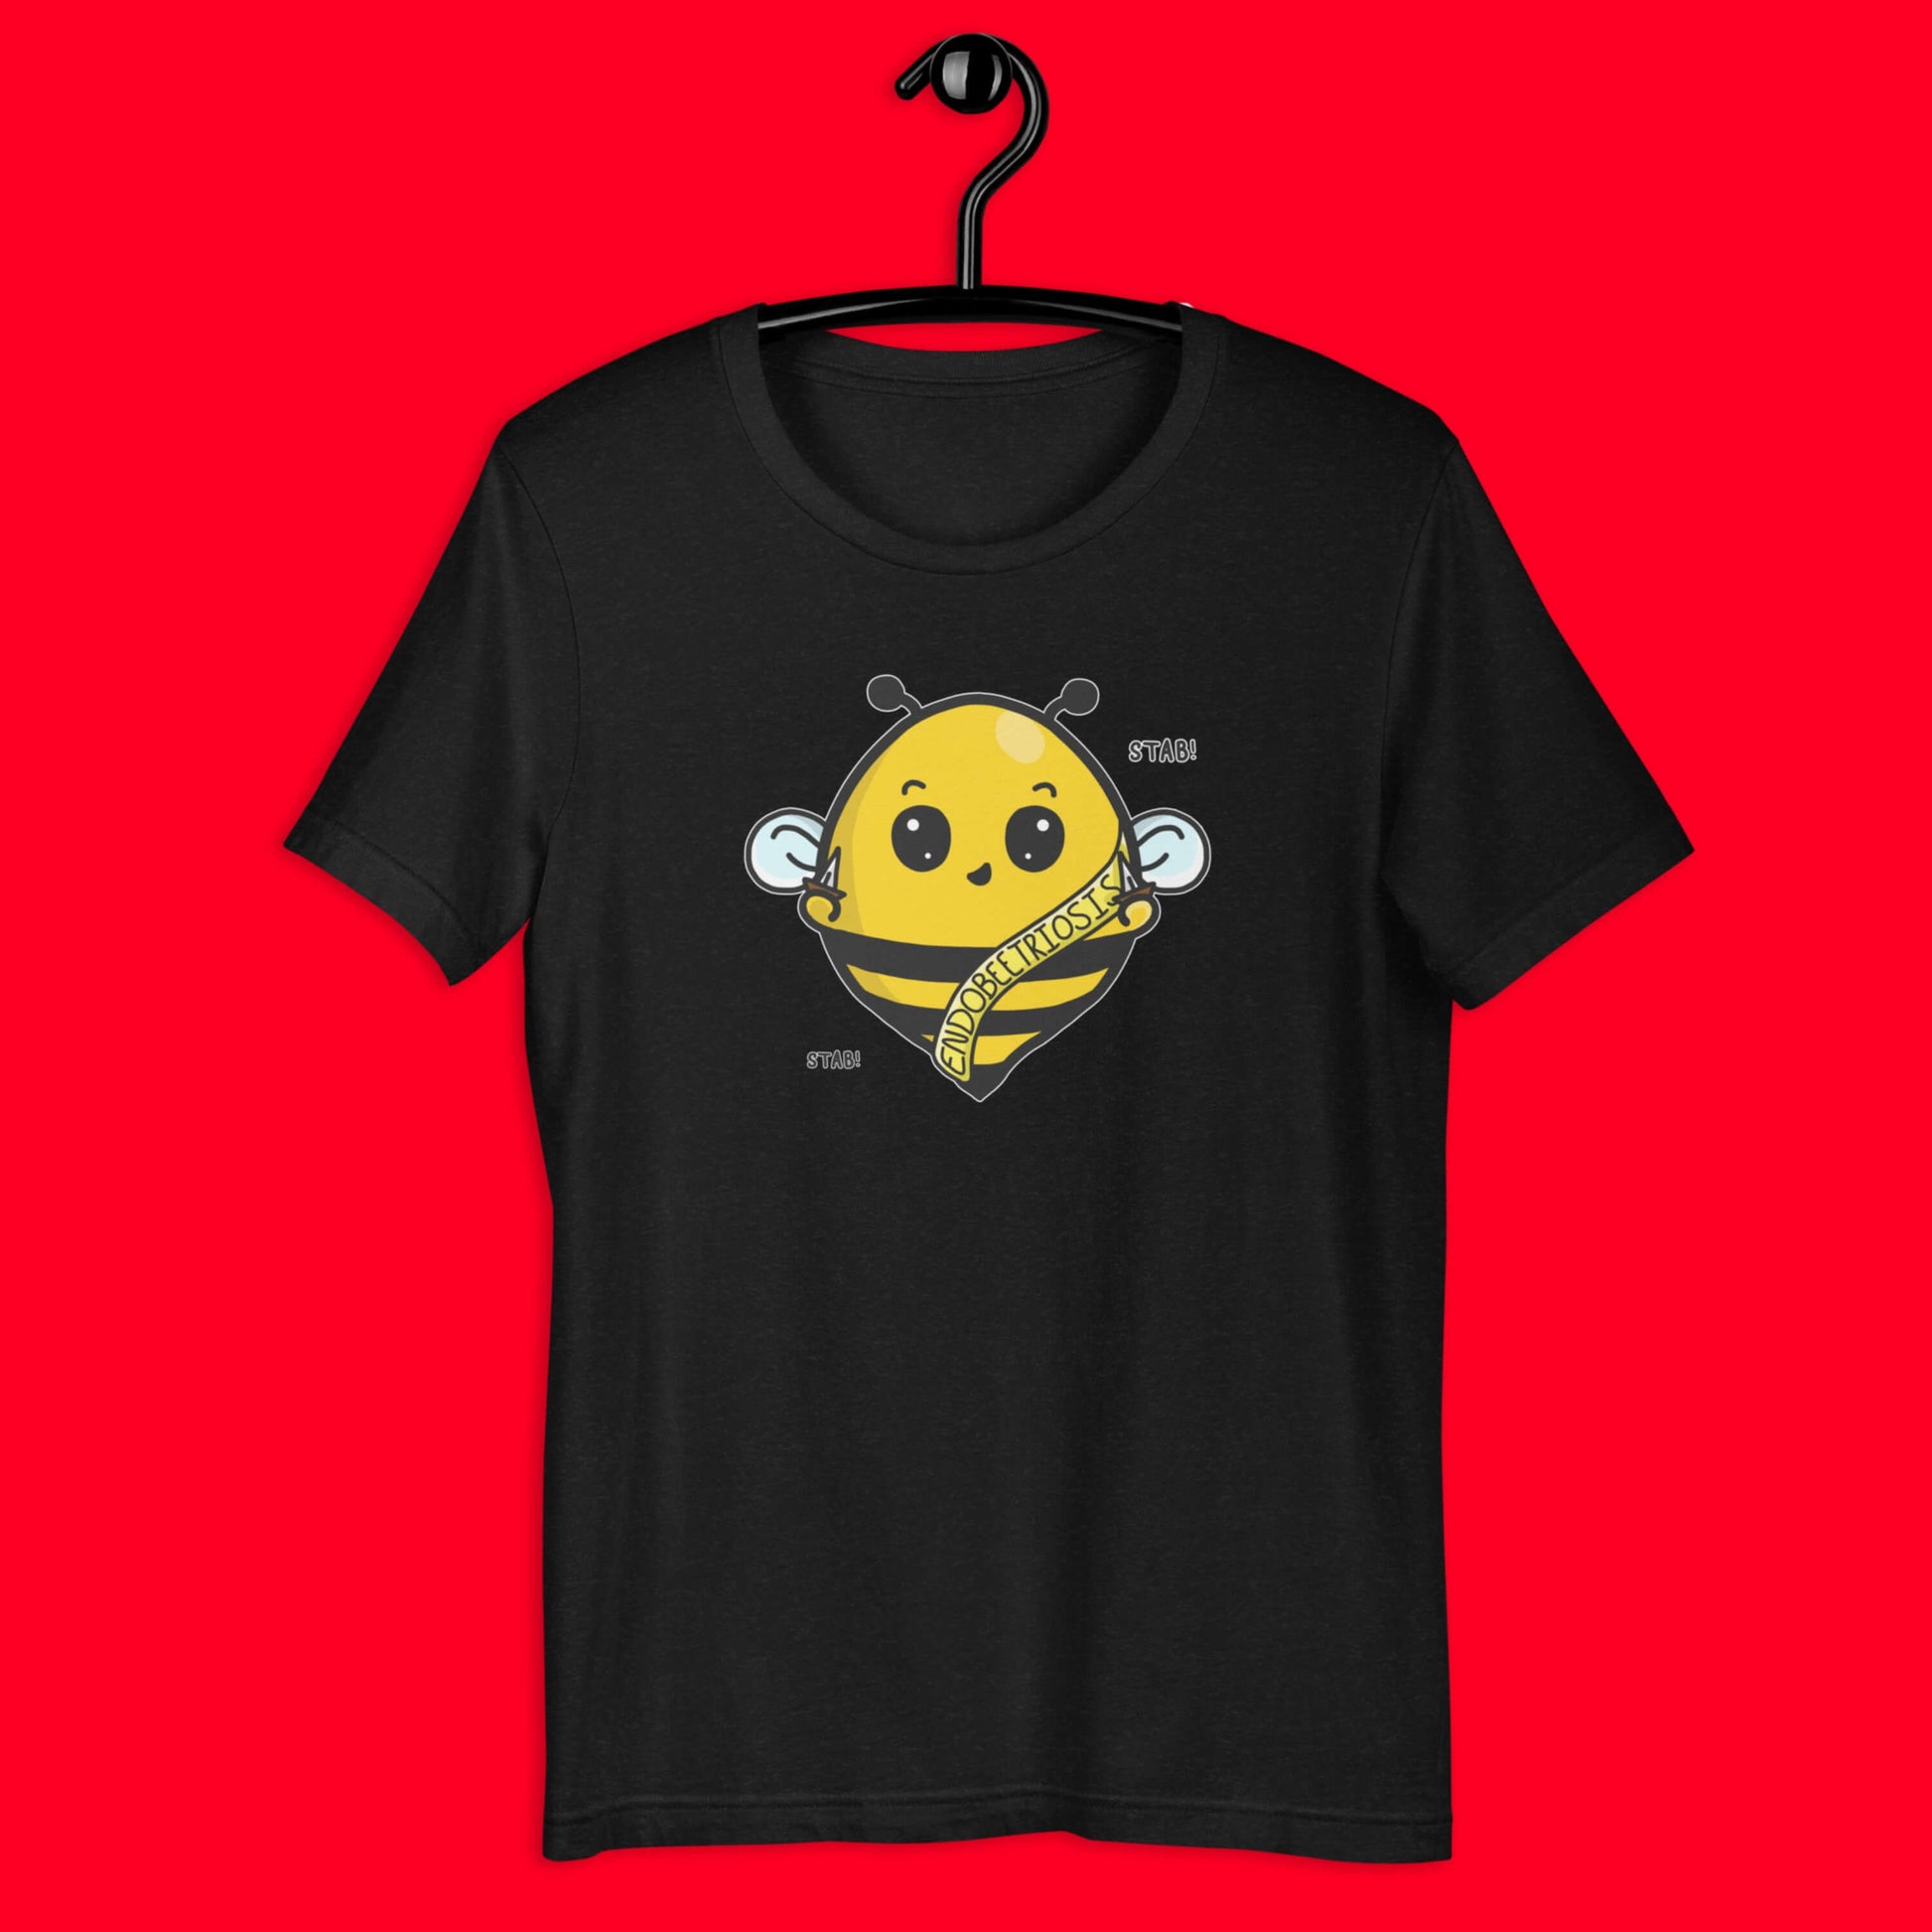 The Endobeetriosis Tee - Endometriosis hung on a black hanger over a red background. The black short sleeve tshirt features a smiling happy bumblebee holding small daggers with a yellow banner reading 'endobeetriosis' with the words 'stab! stab!' surrounding the buzzy bee. The hand drawn design is raising awareness for endometriosis. 